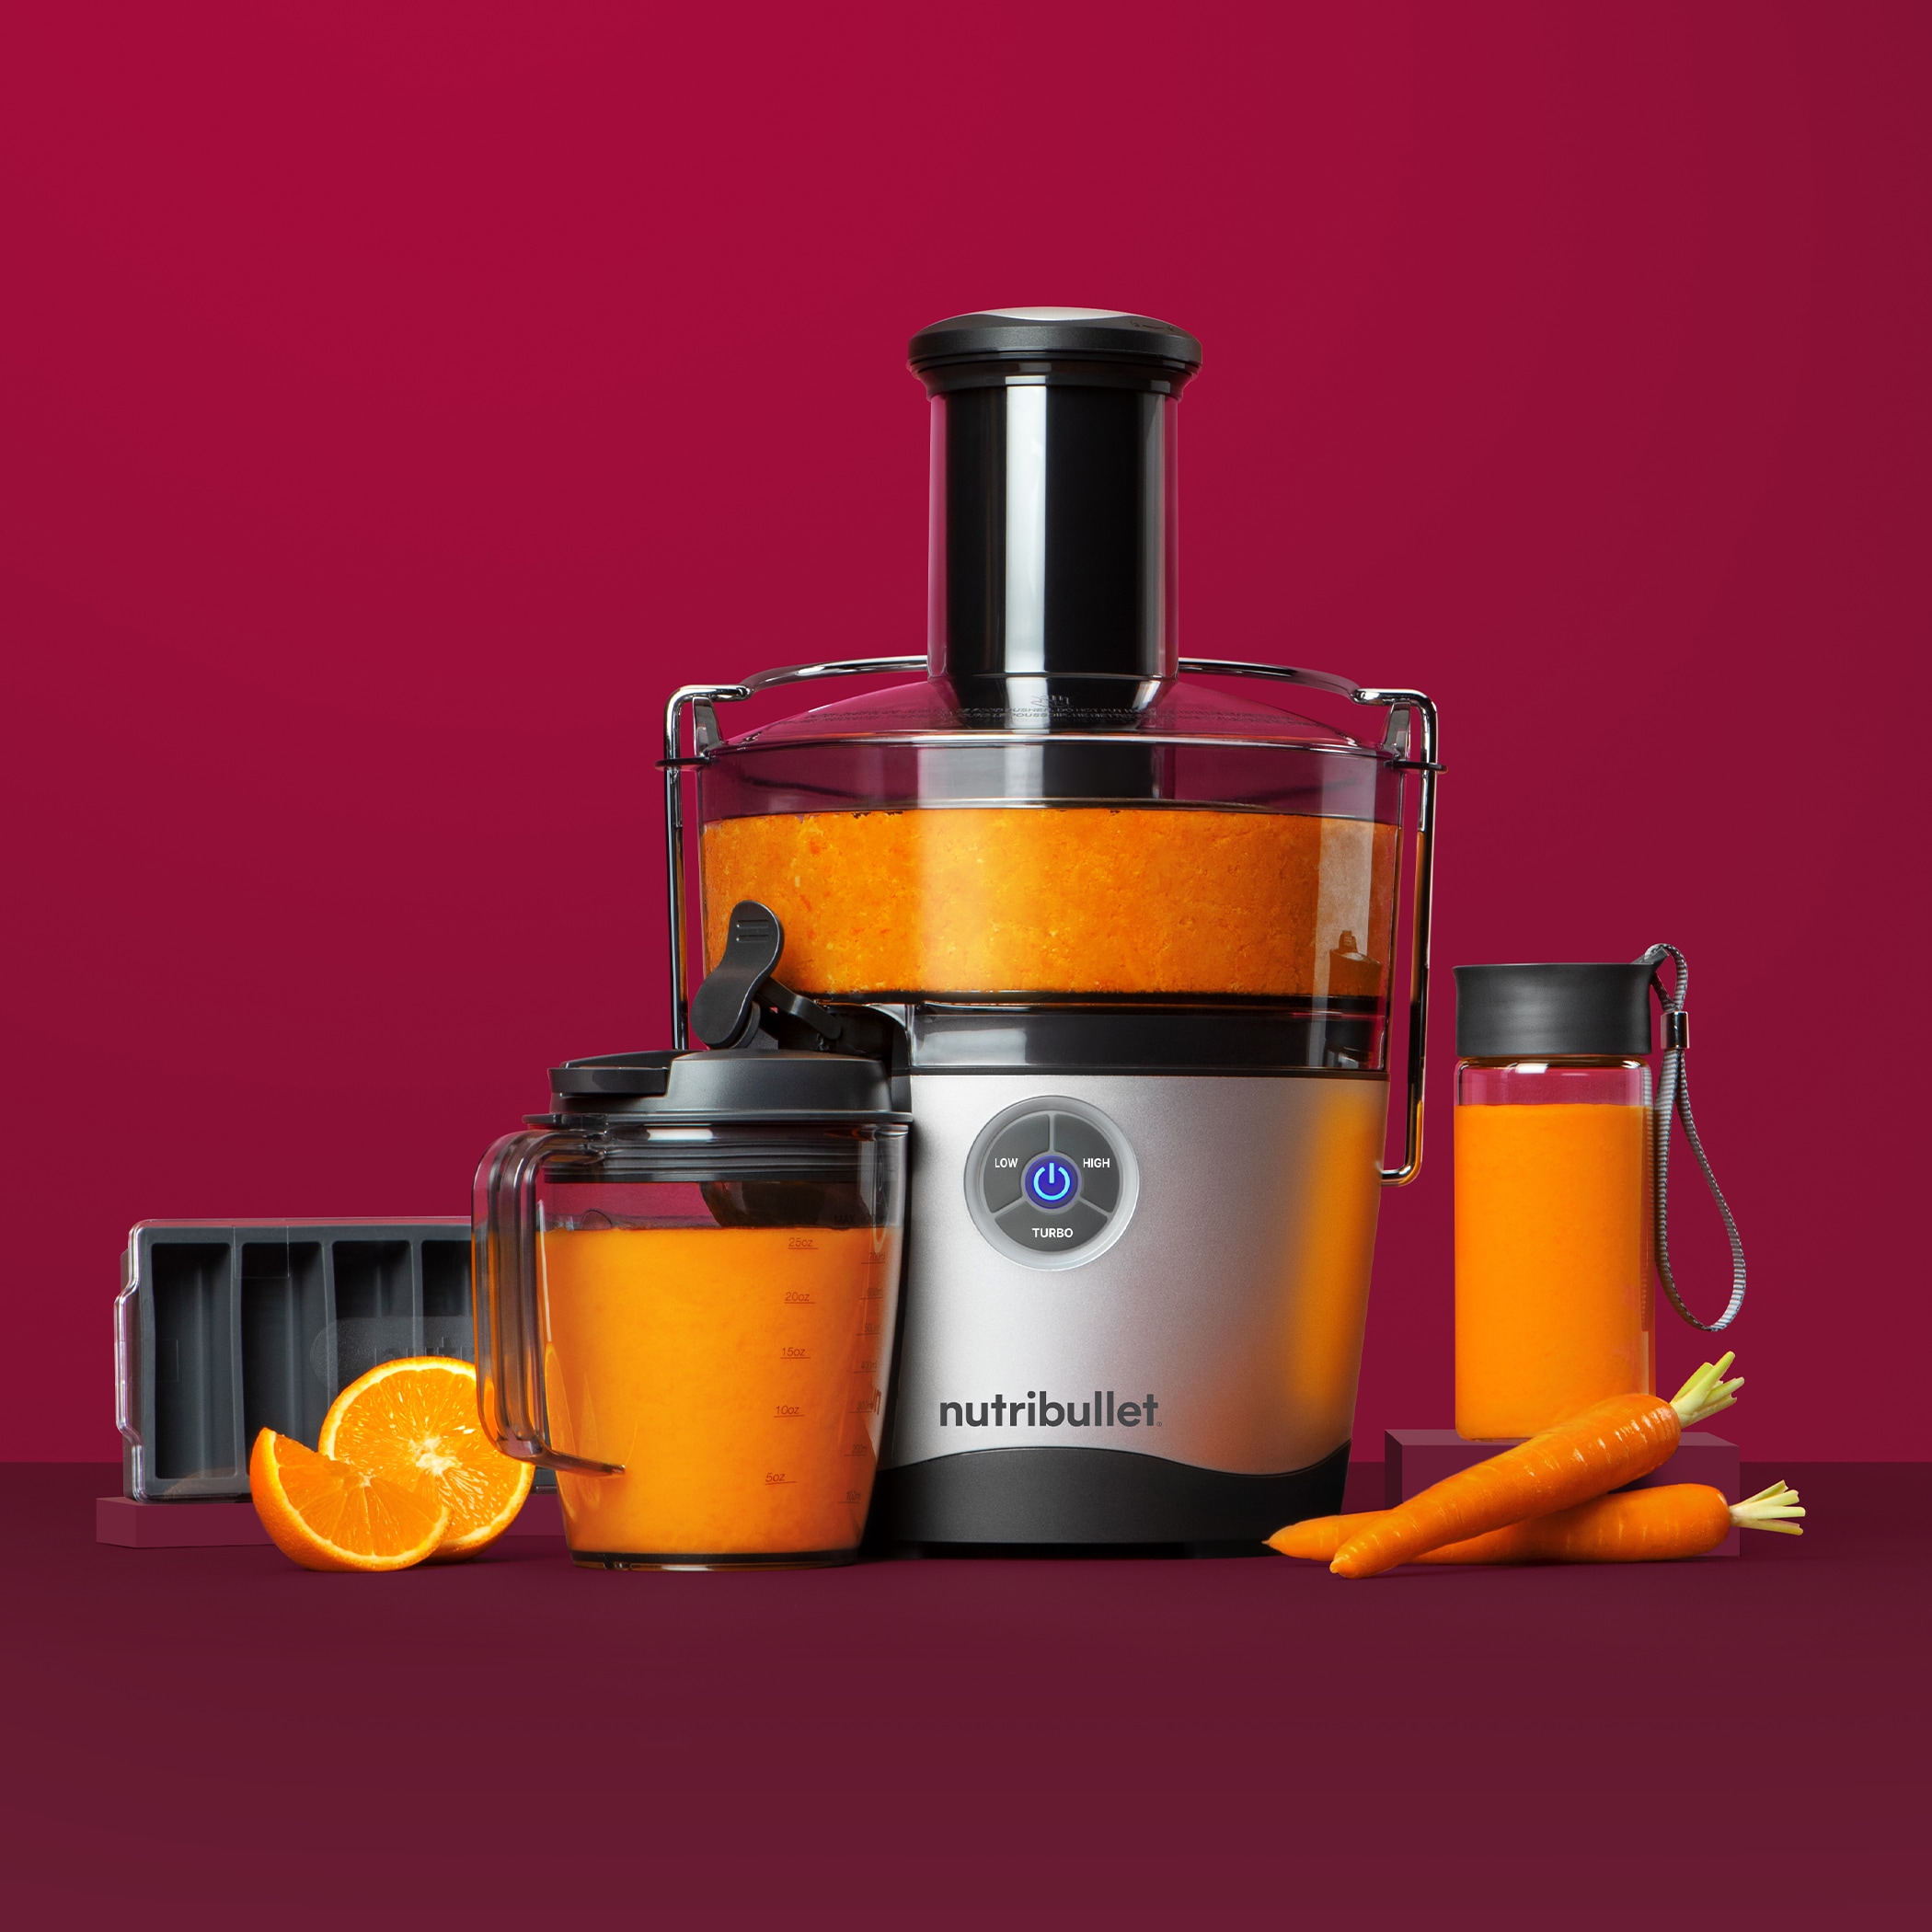 Hamilton Beach Big Mouth Pro Juice Extractor - Lockable, Gray, Extractor  Type, cETLus Safety Listed, Dishwasher-Safe, Powerful 1.1 Hp Motor in the  Juicers department at